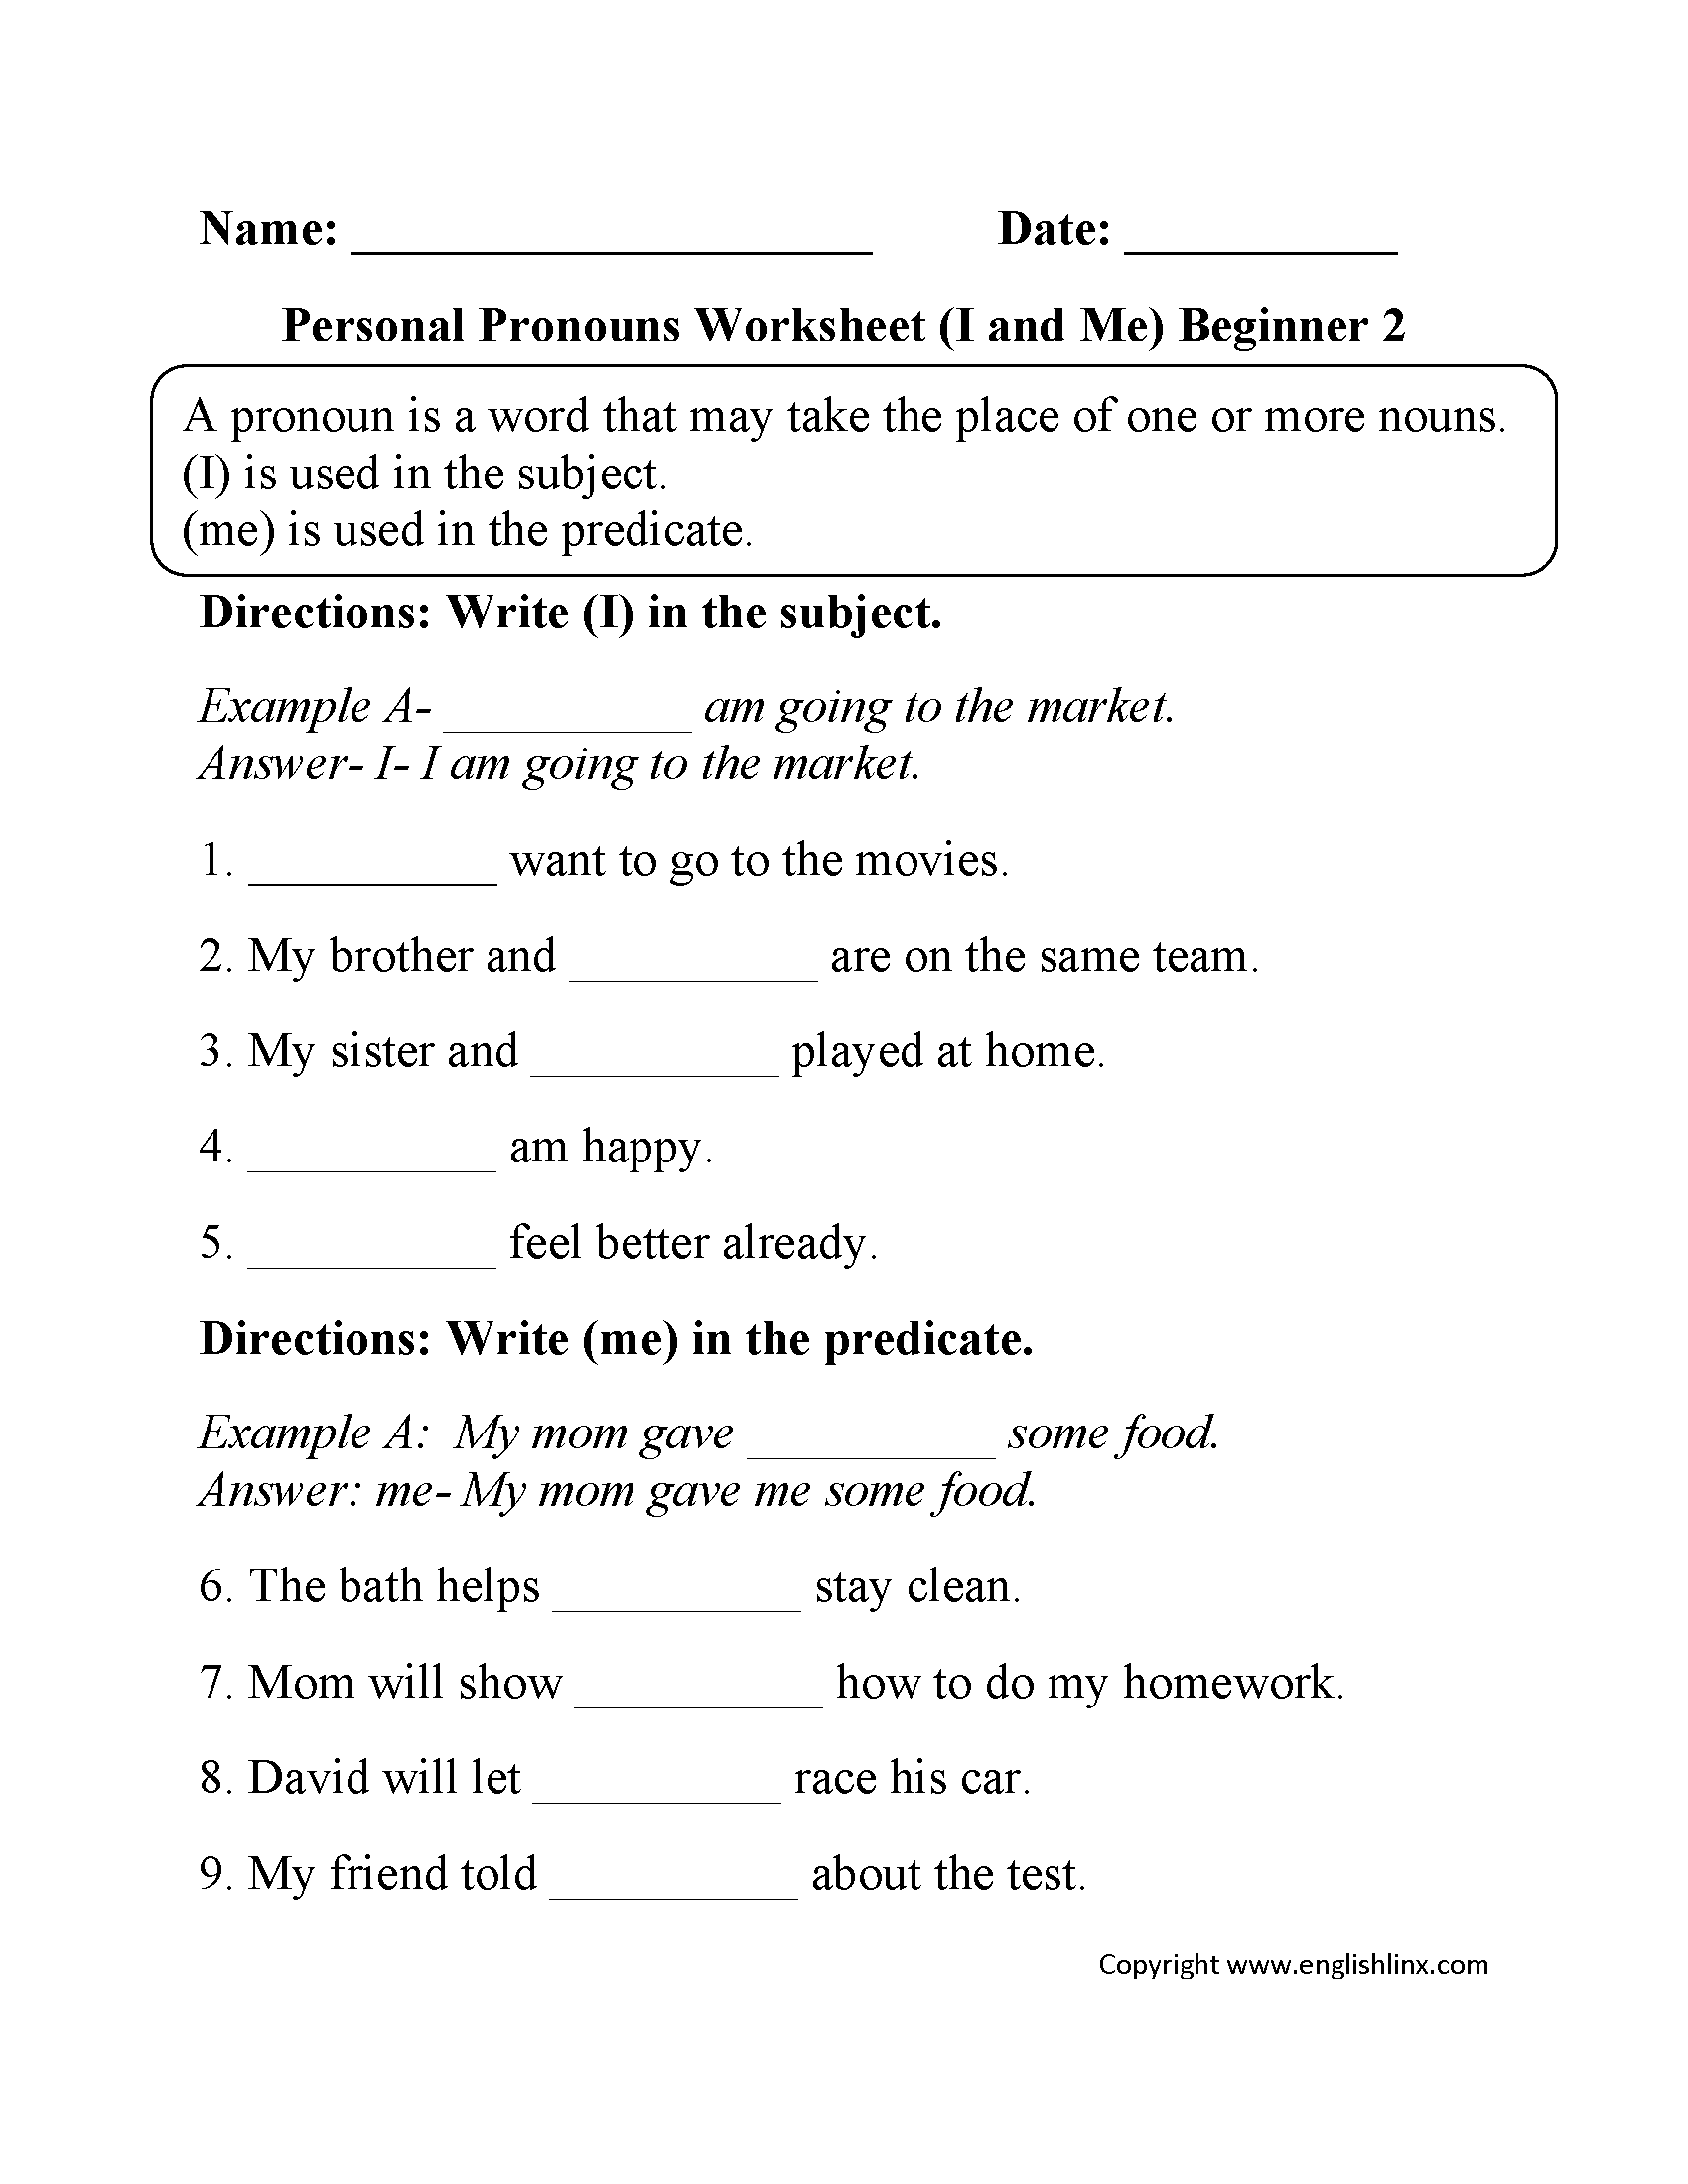 personal-pronouns-worksheets-i-and-me-personal-pronouns-worksheets